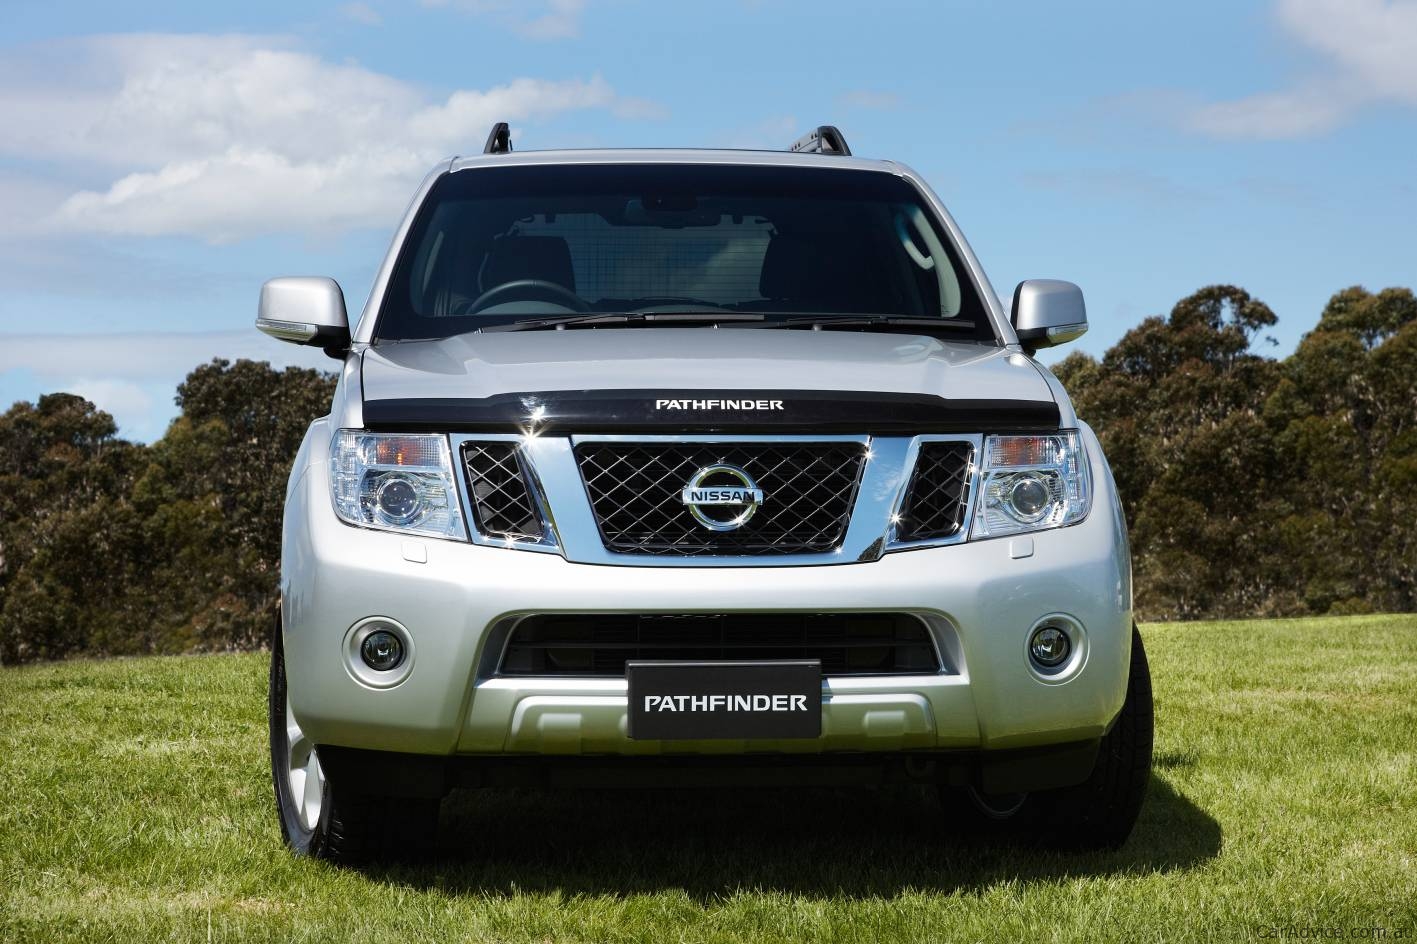 23000231 Nissan pathfinder review #7